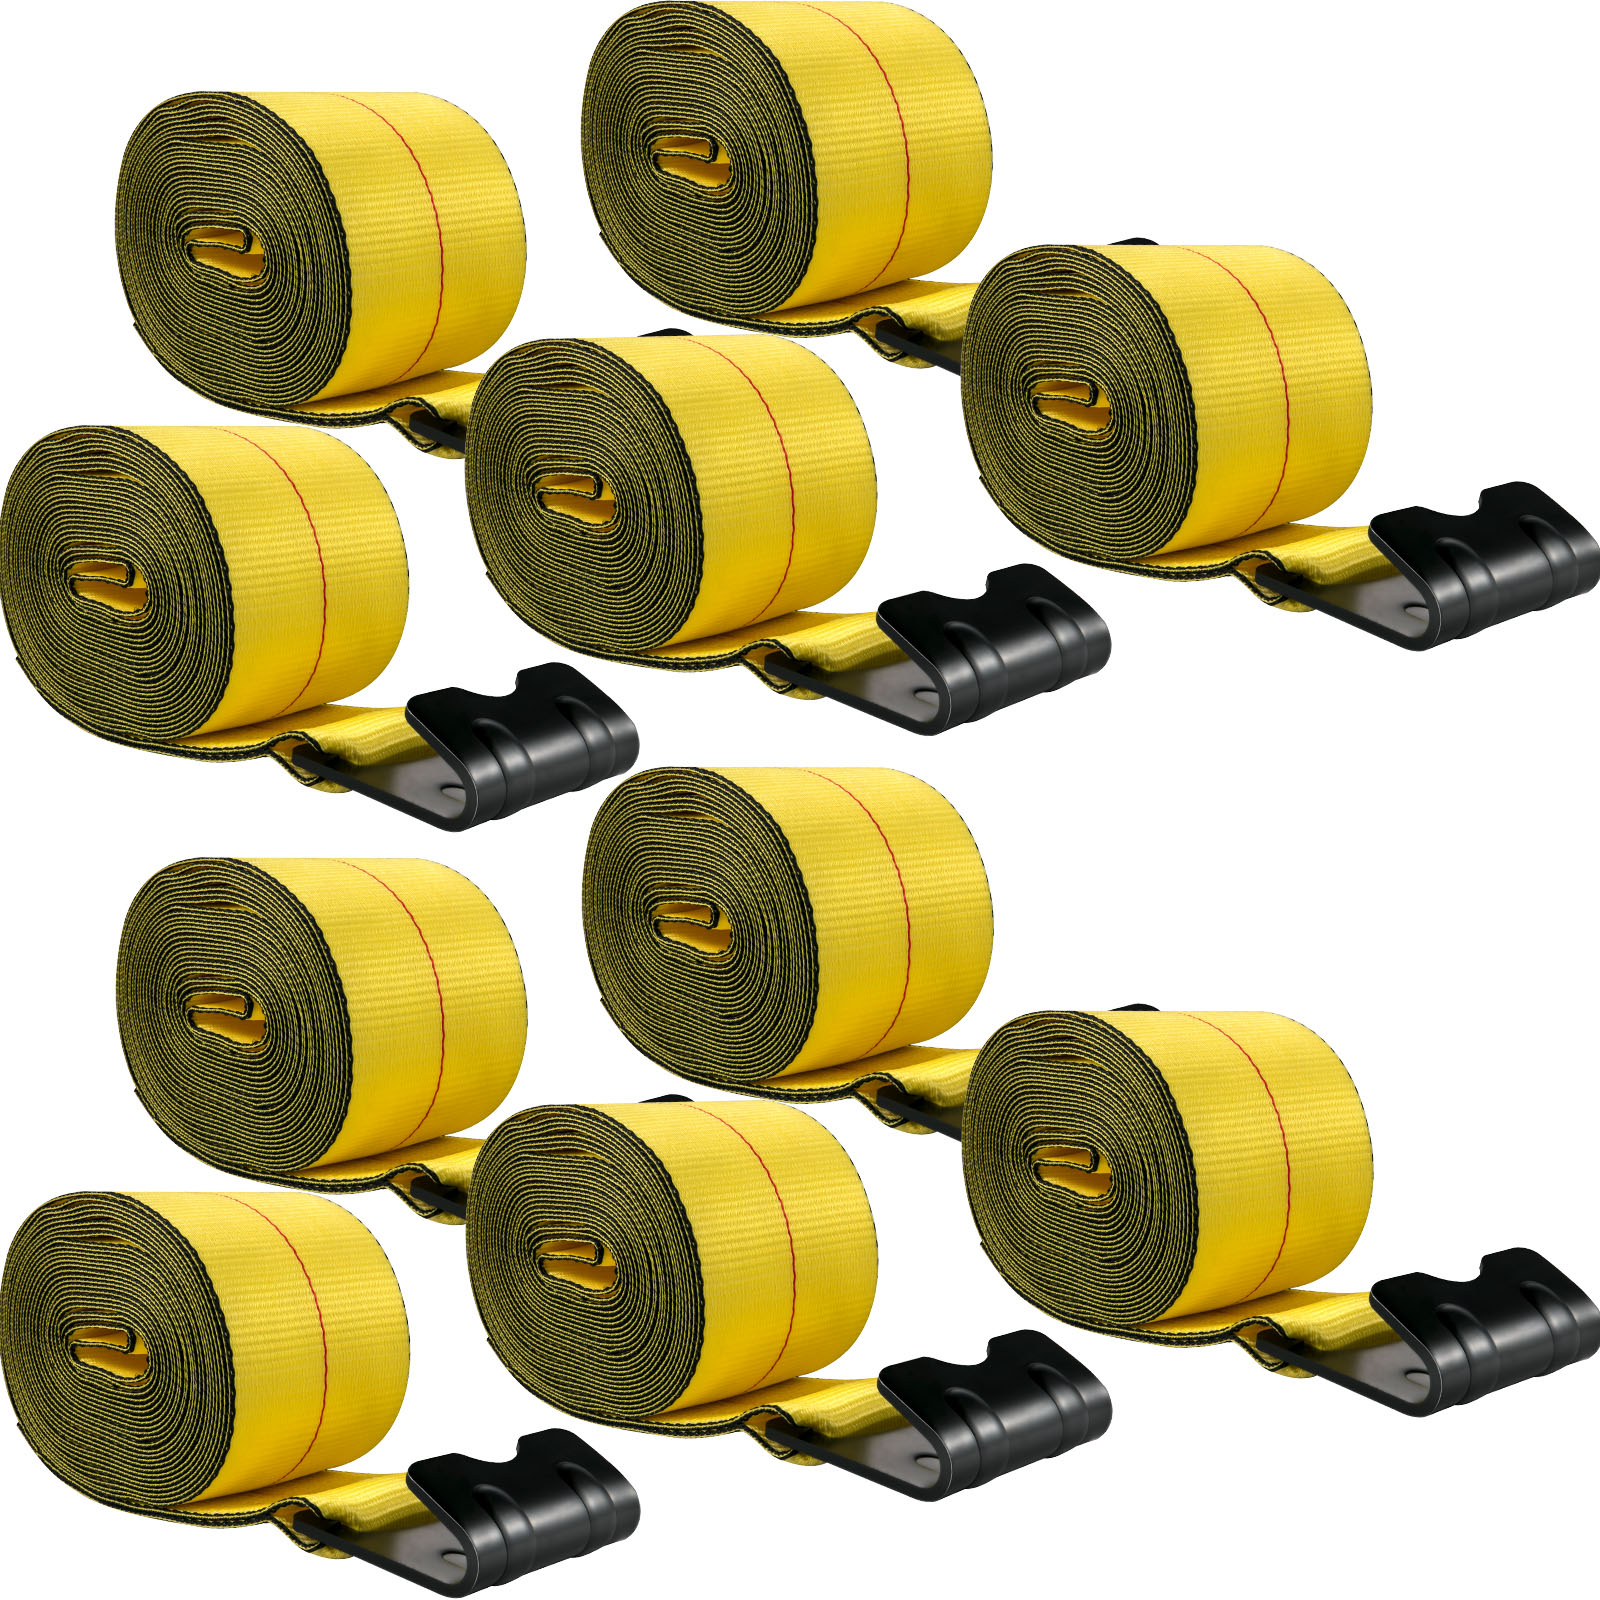 Vevor Truck Straps Winch Straps 4"x30' With Flat Hook For Towing Yellow 10 Pack от Vevor Many GEOs